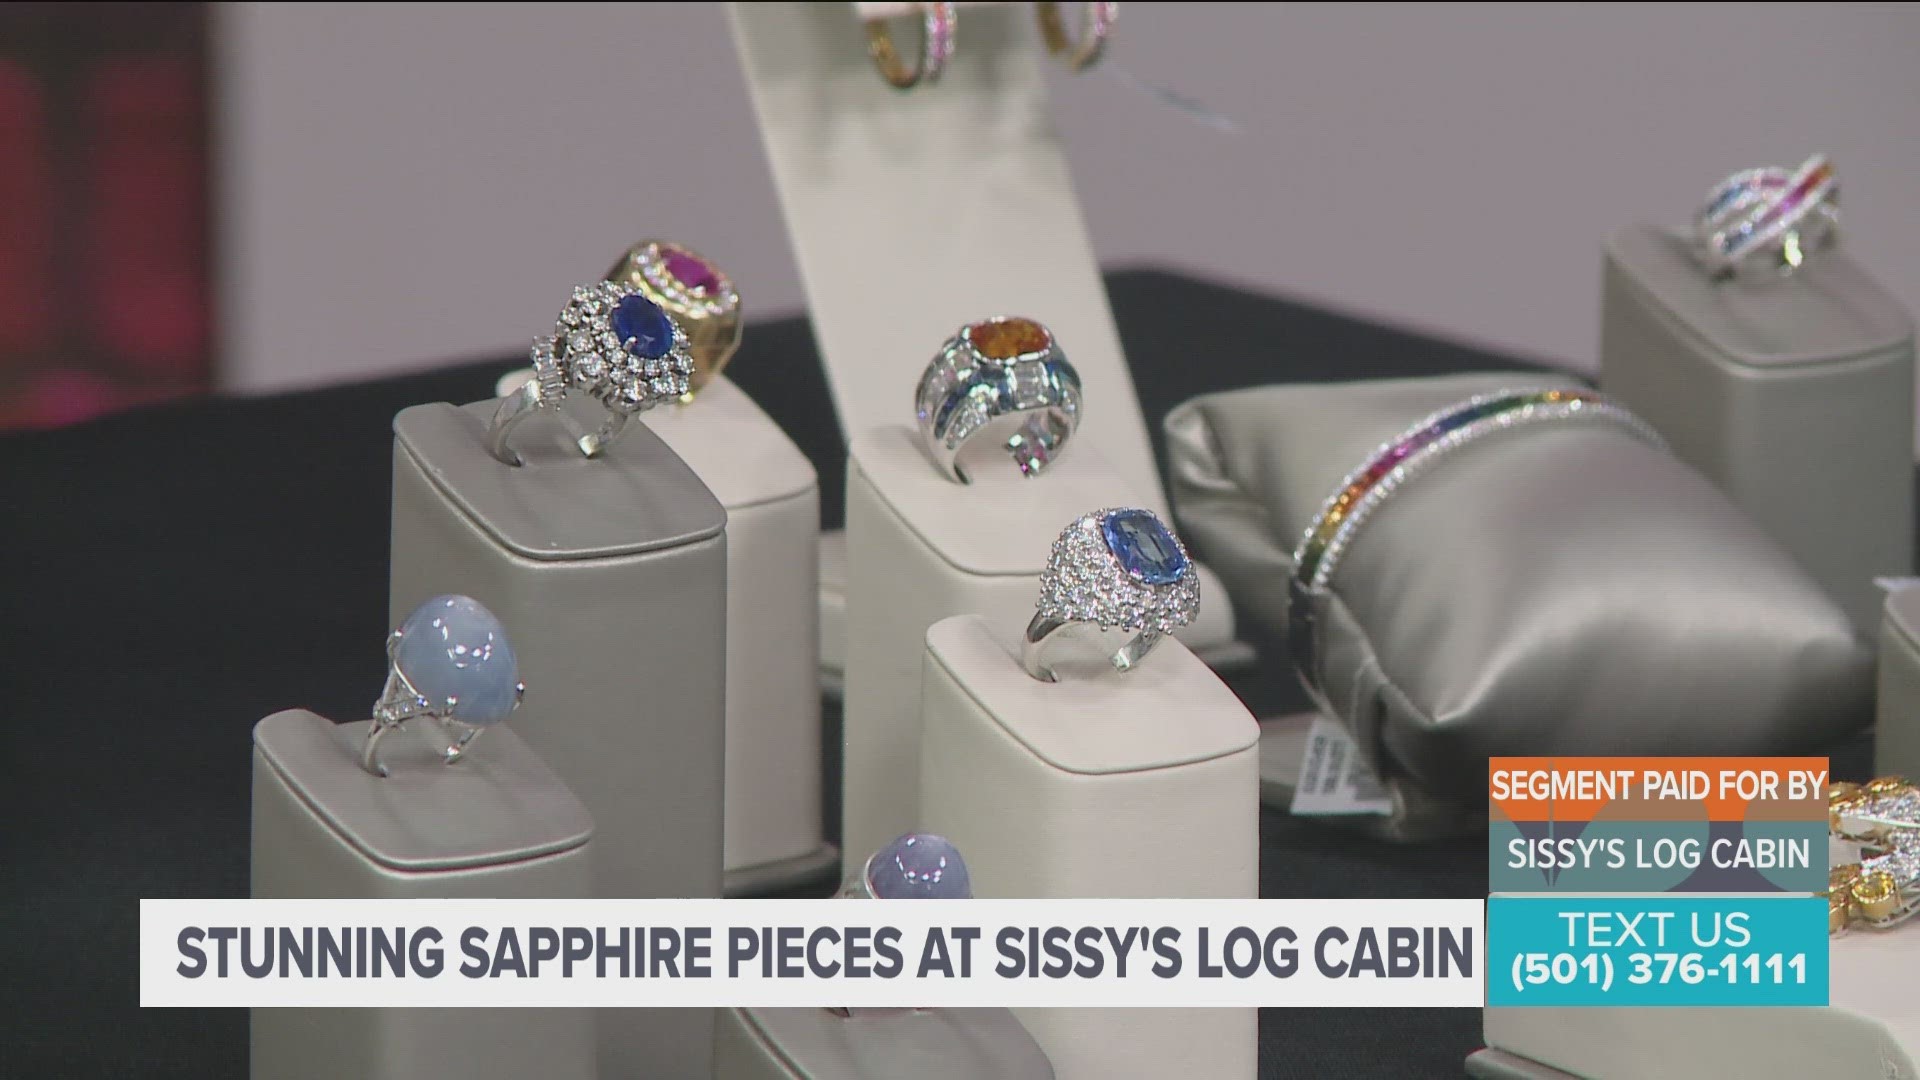 Jim Englehorn tells us about sapphire statement pieces they have at Sissy's Log Cabin.